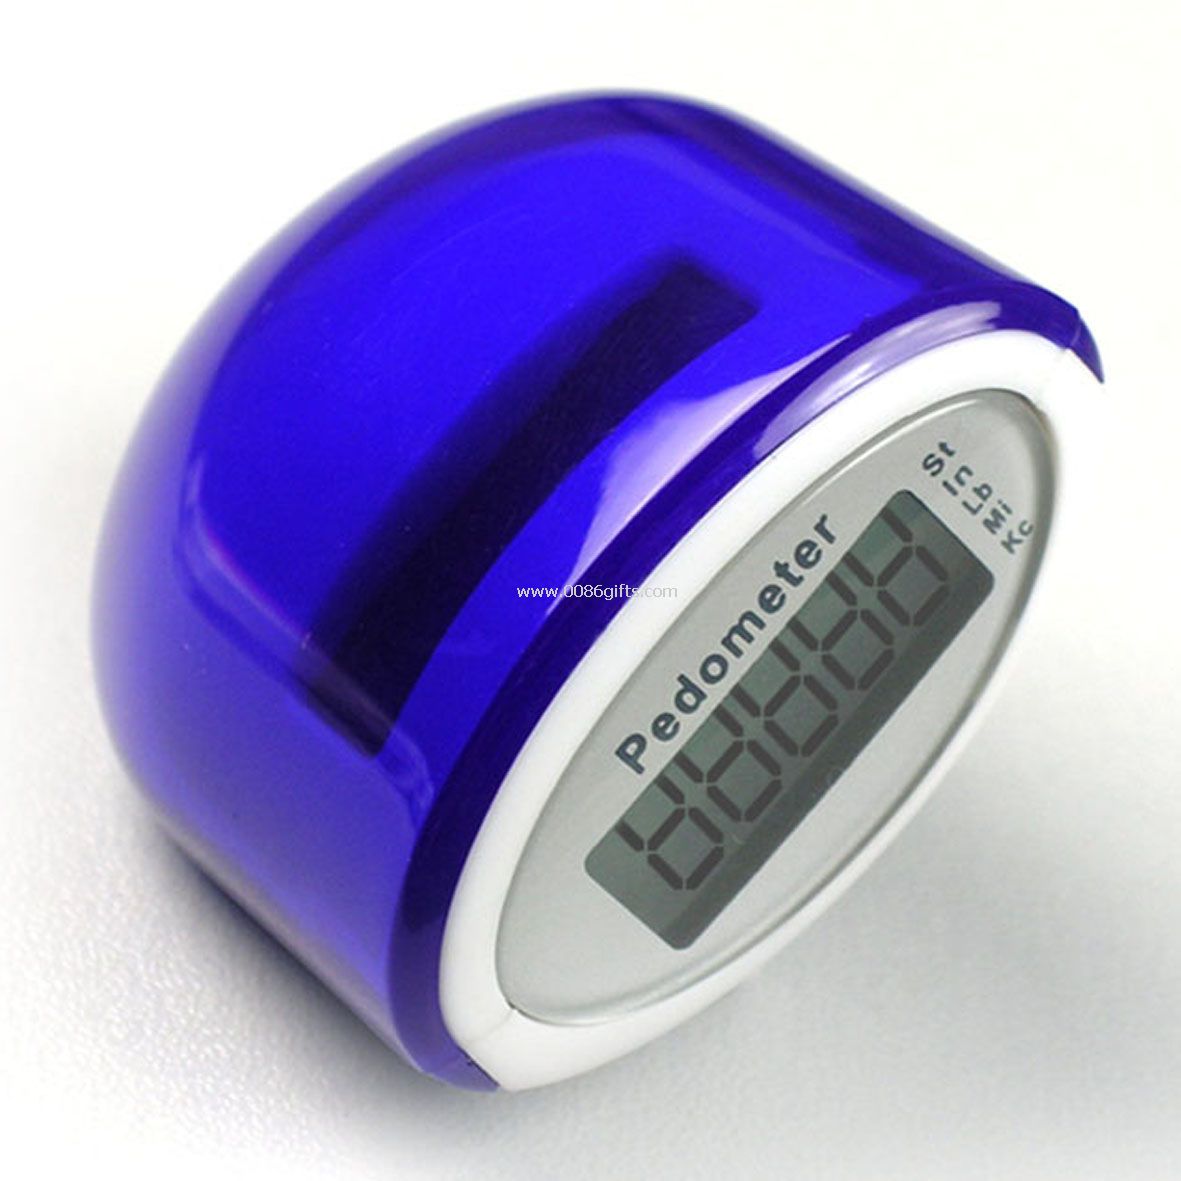 Solar and battery powered pedometer